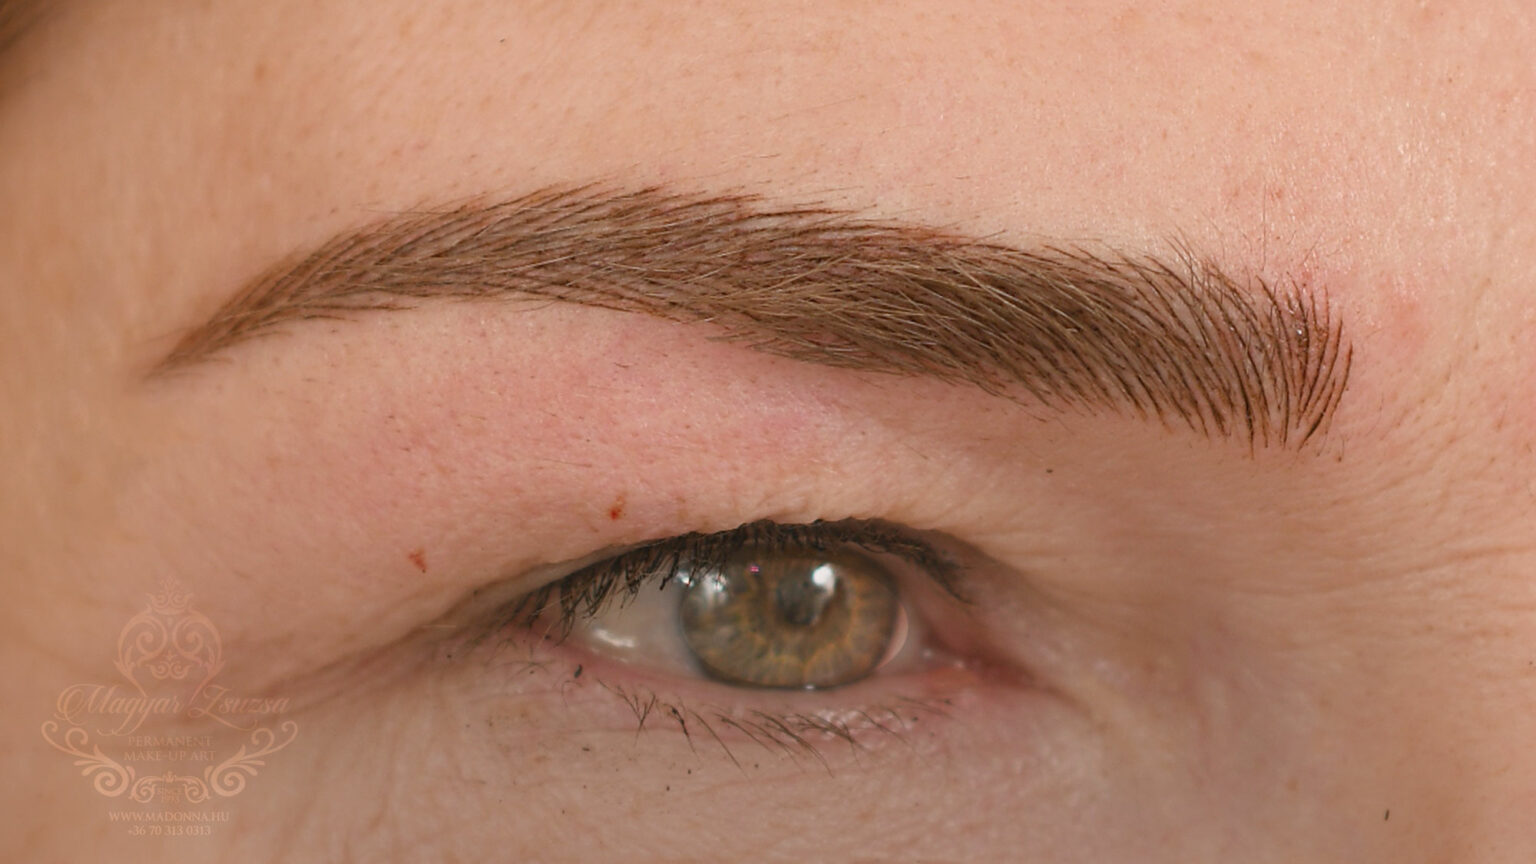 002_PHIBROWS-1536x864-1.jpg